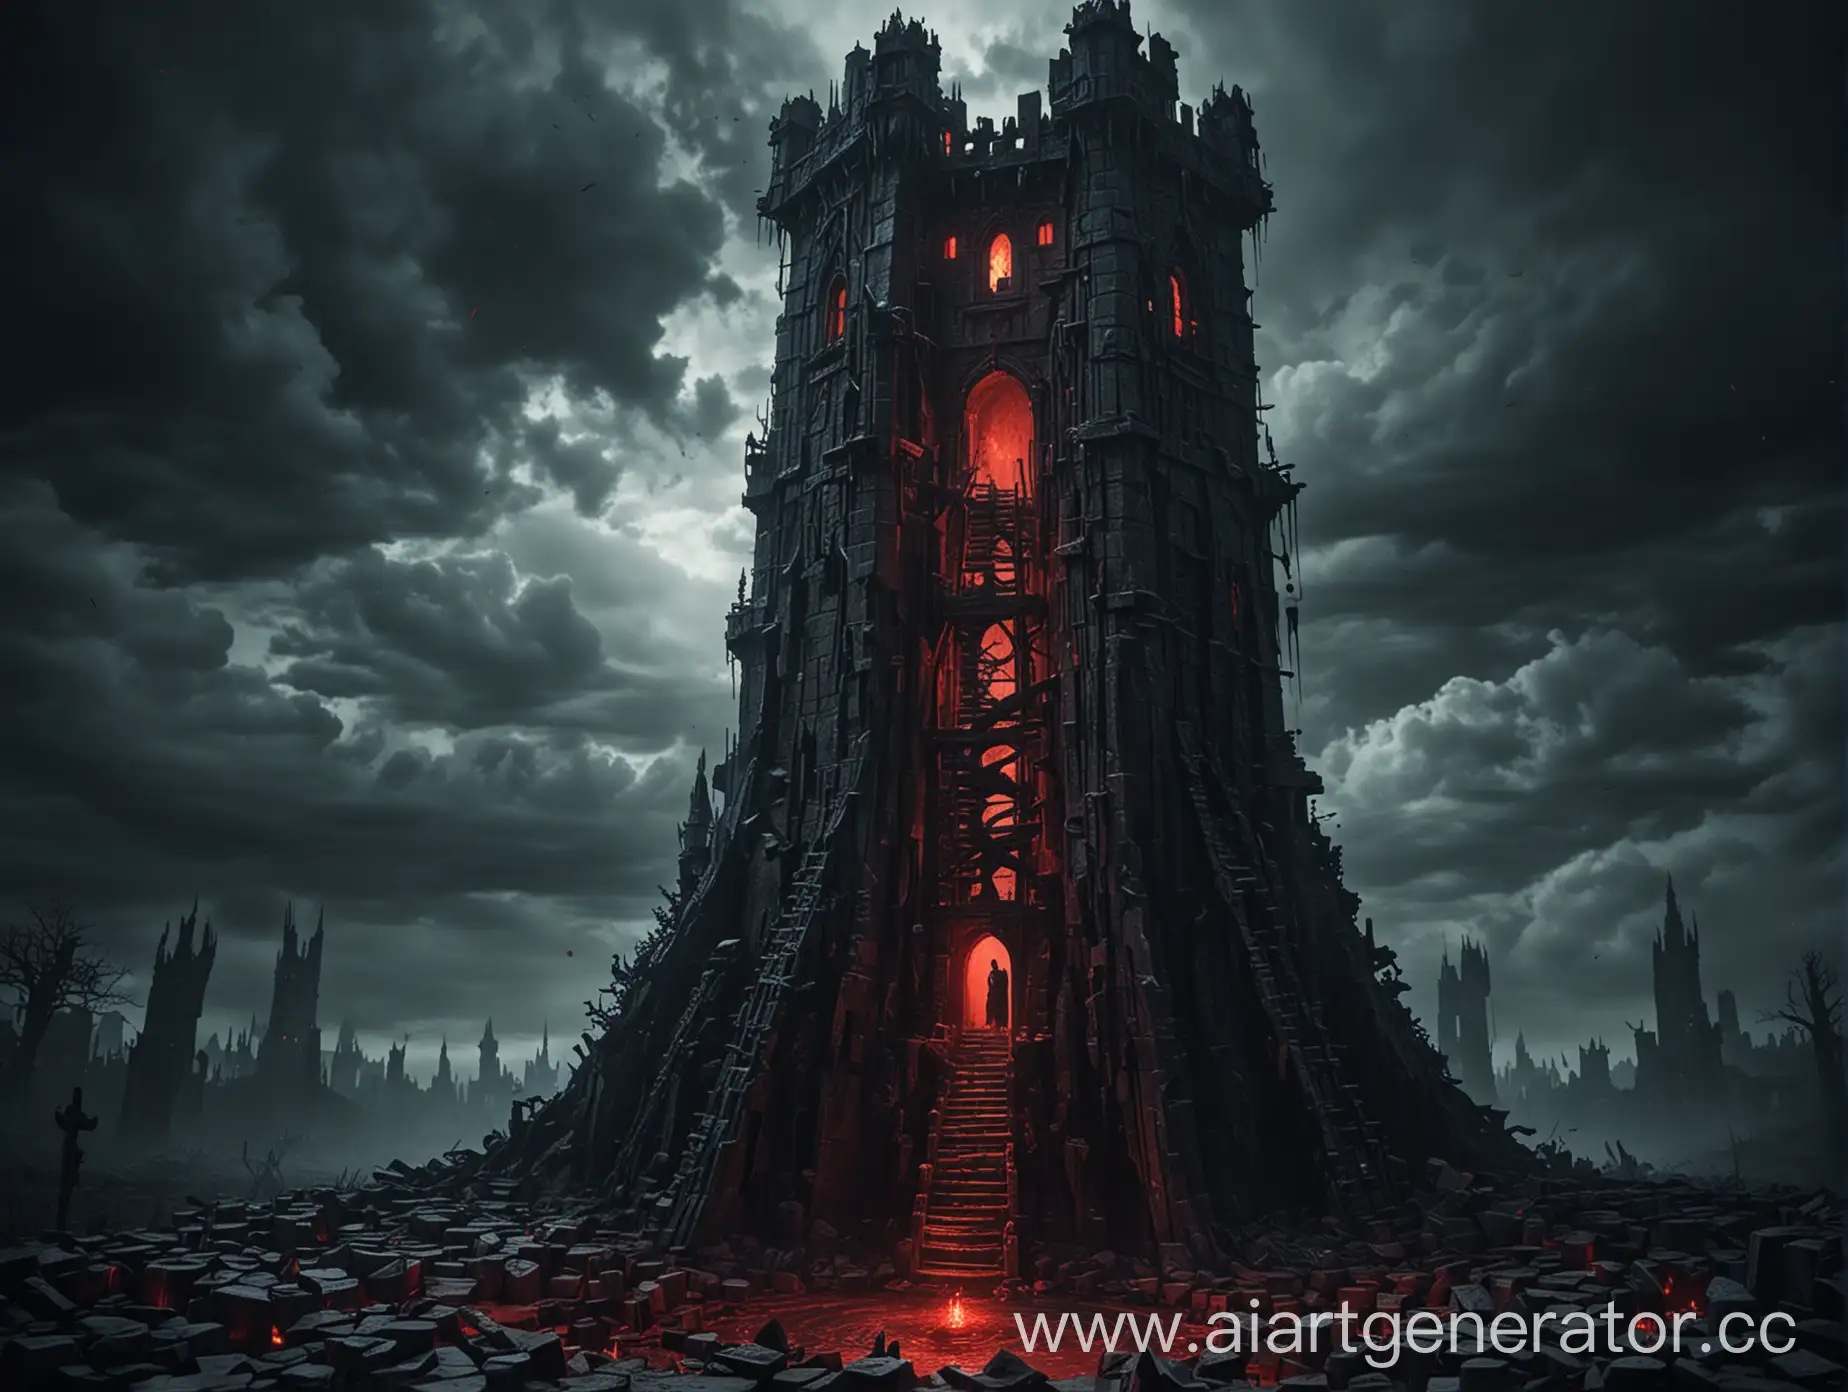 Mystical-Tower-in-Endless-Labyrinth-with-Blood-and-Darkness